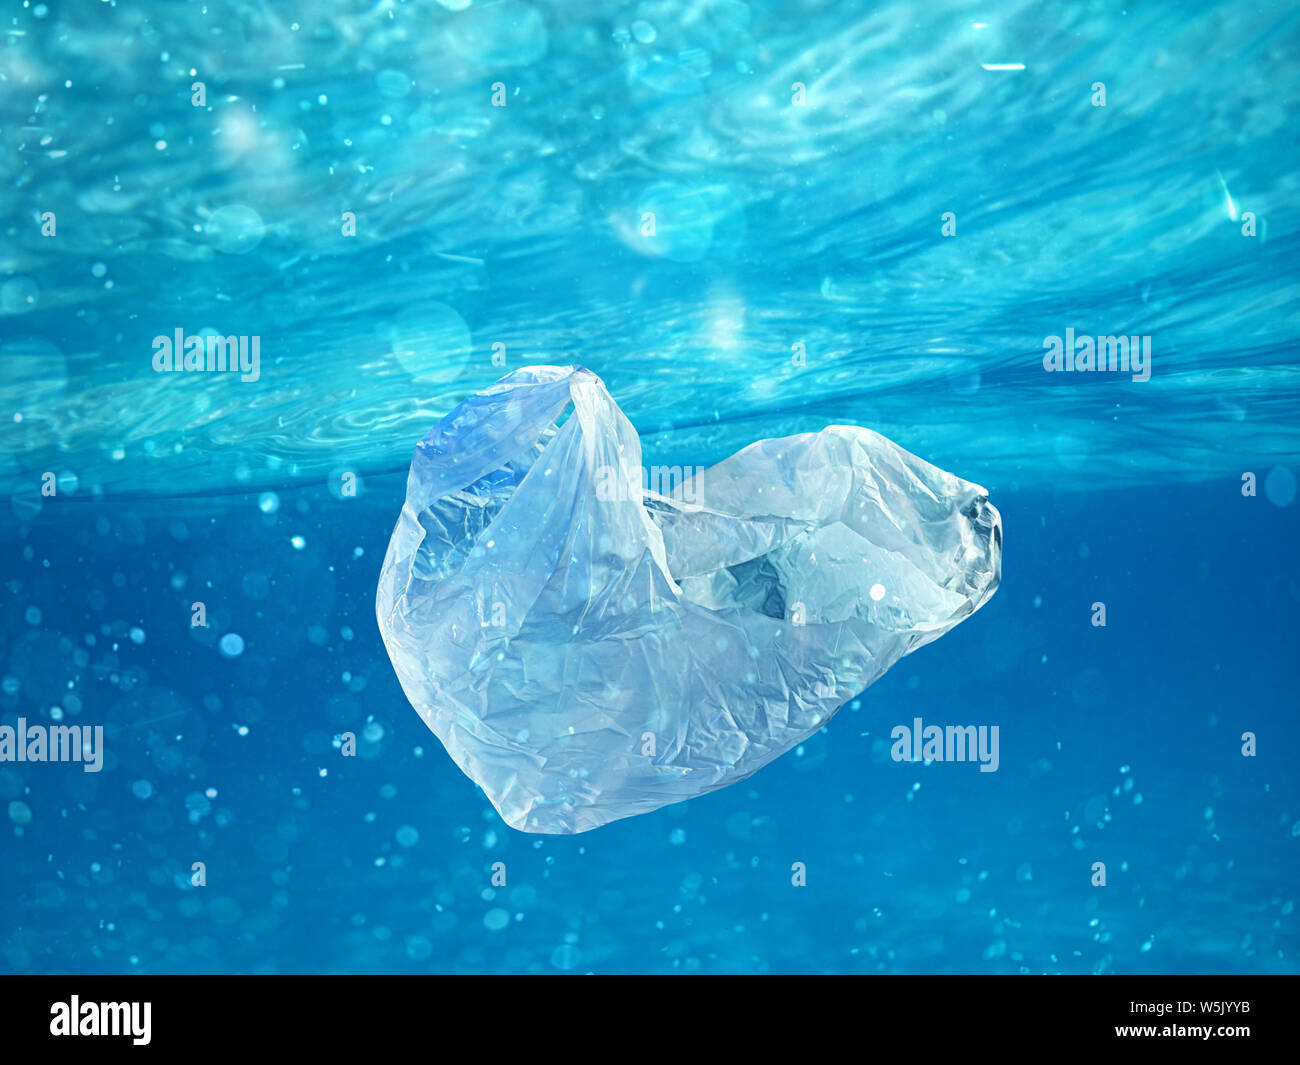 Floating bag. Problem of plastic pollution under the sea concept. Stock Photo